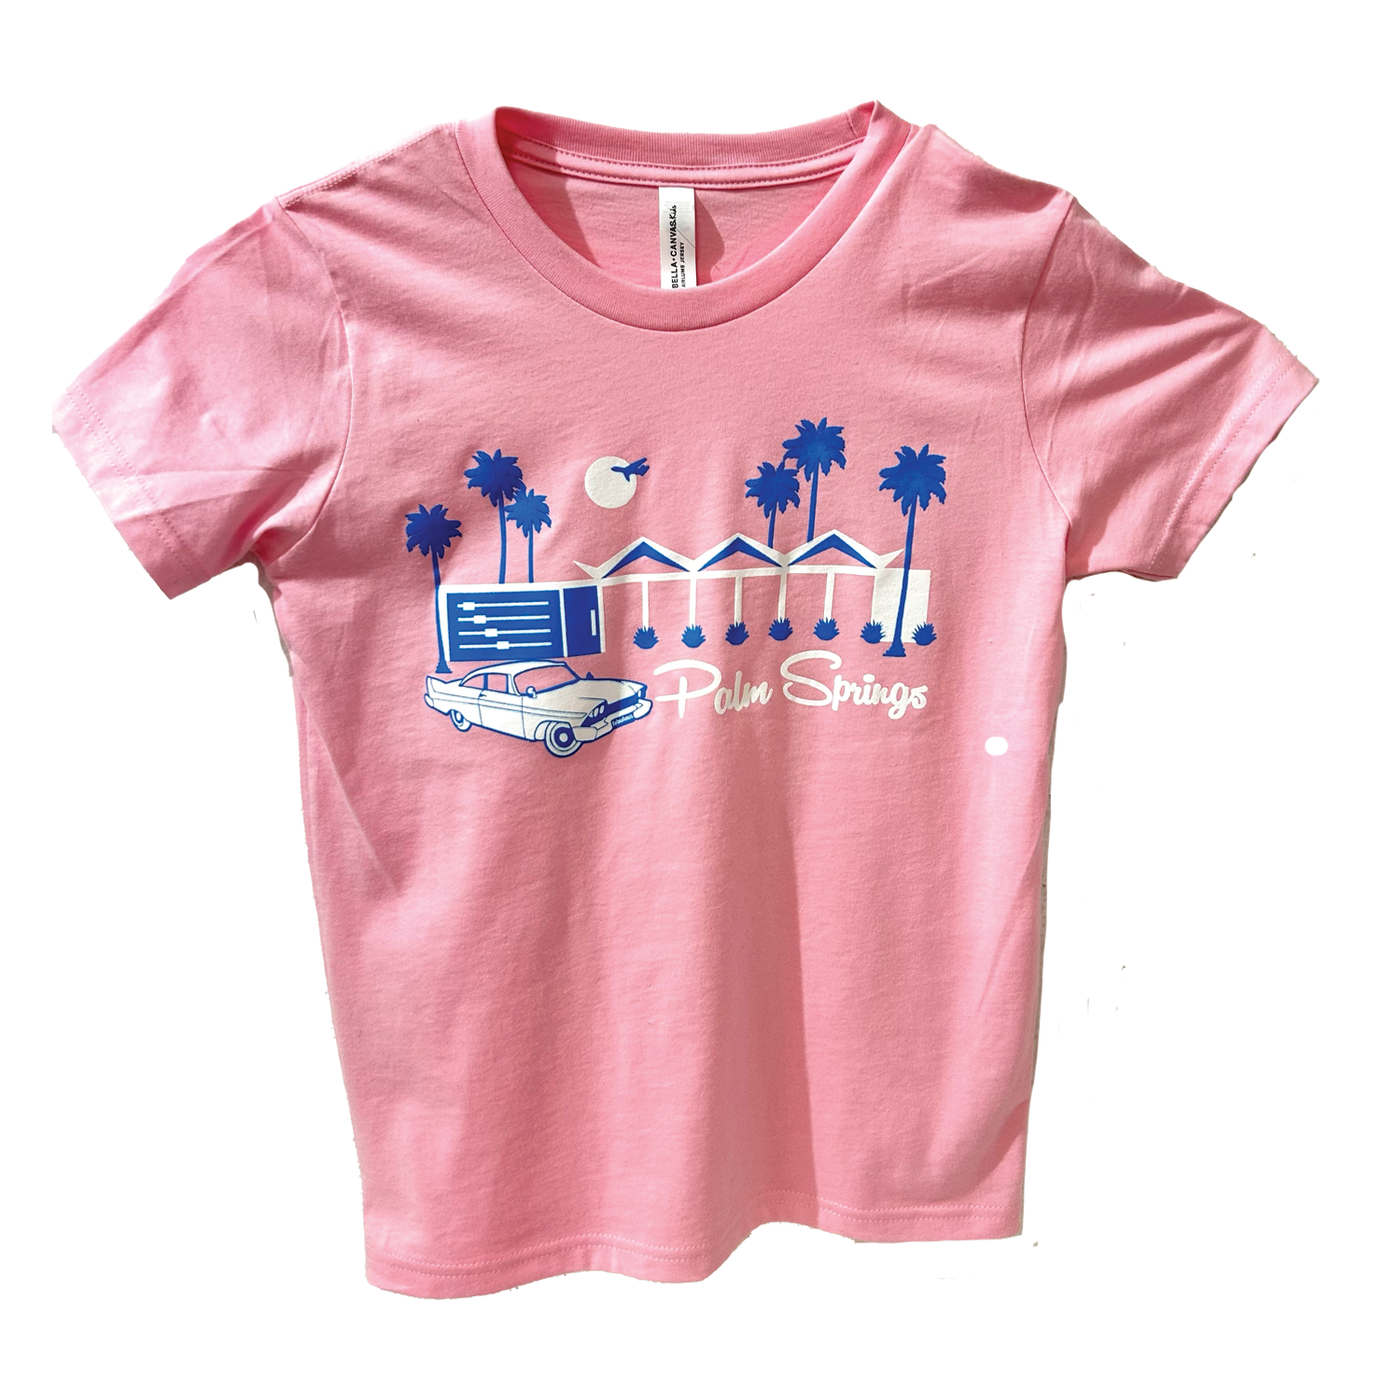 Zig Zag Youth Crew Neck T-Shirt Pink/Teal